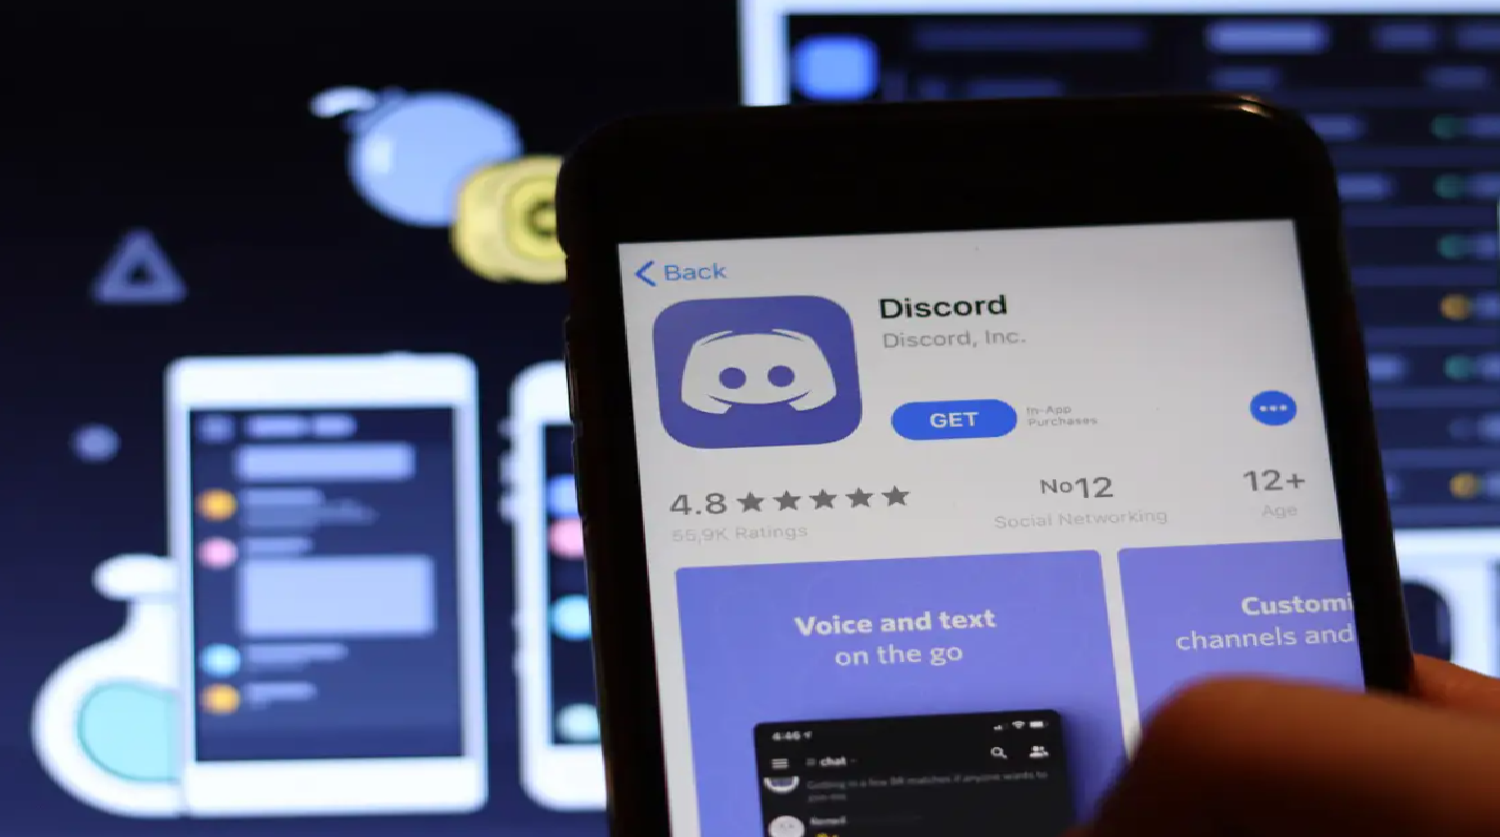 open discord in iphone